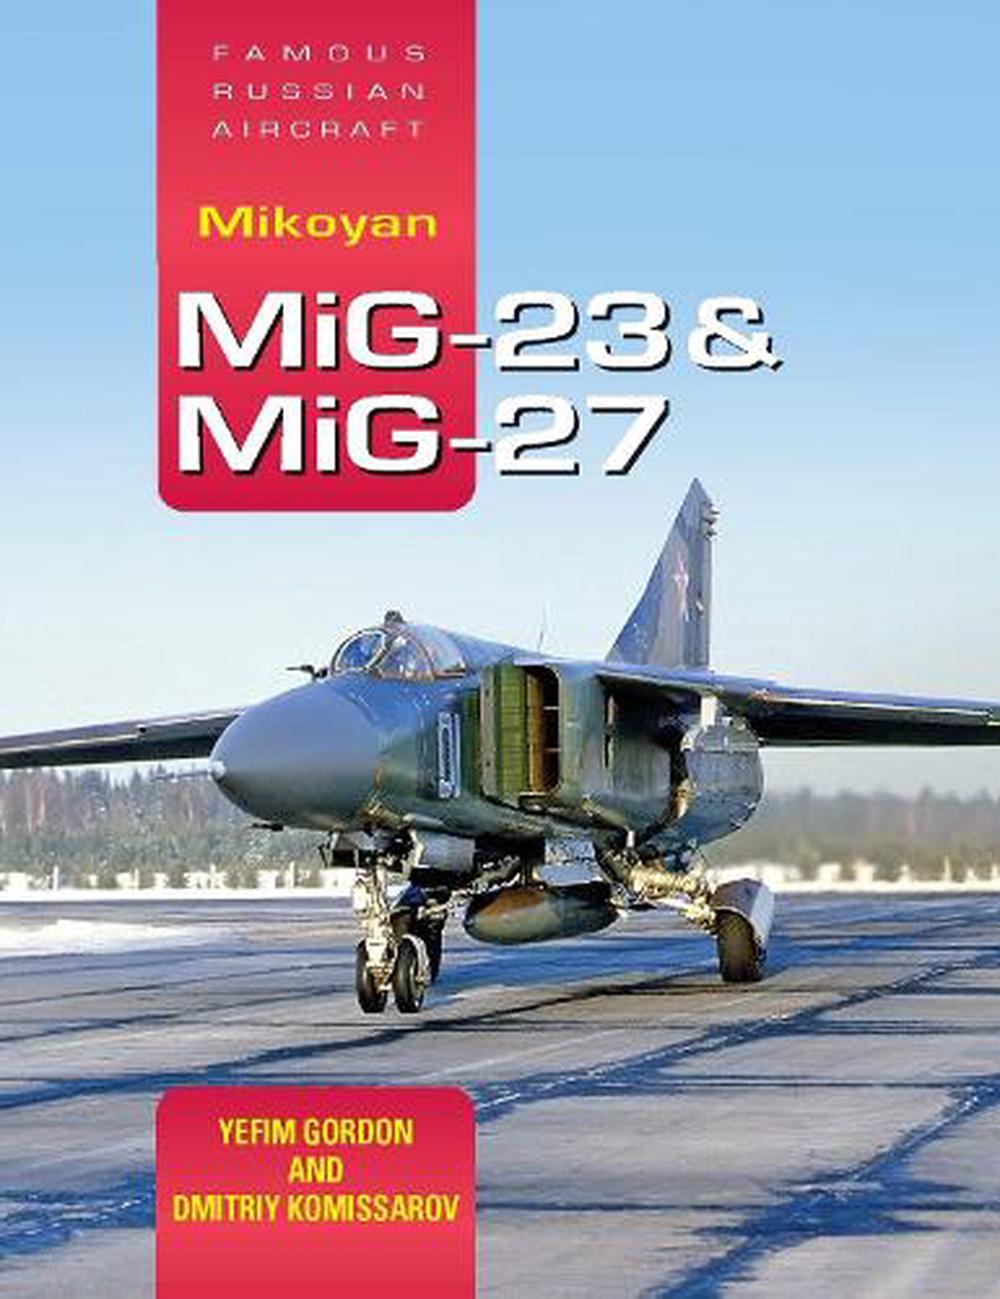 Famous Russian Aircraft: Mikoyan MiG-23 and MiG-27 by Yefim Gordon